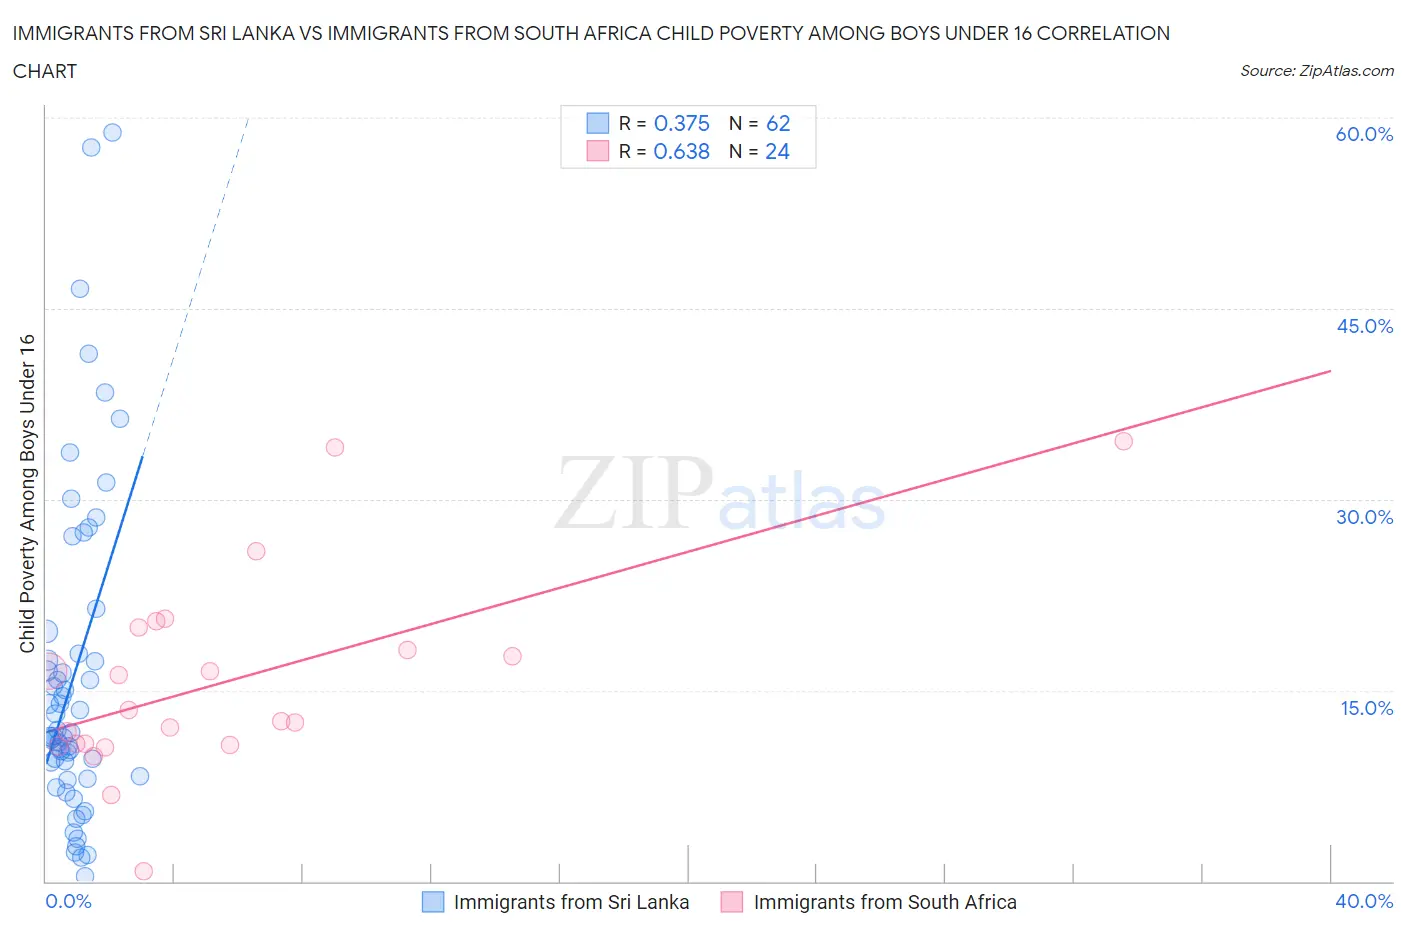 Immigrants from Sri Lanka vs Immigrants from South Africa Child Poverty Among Boys Under 16